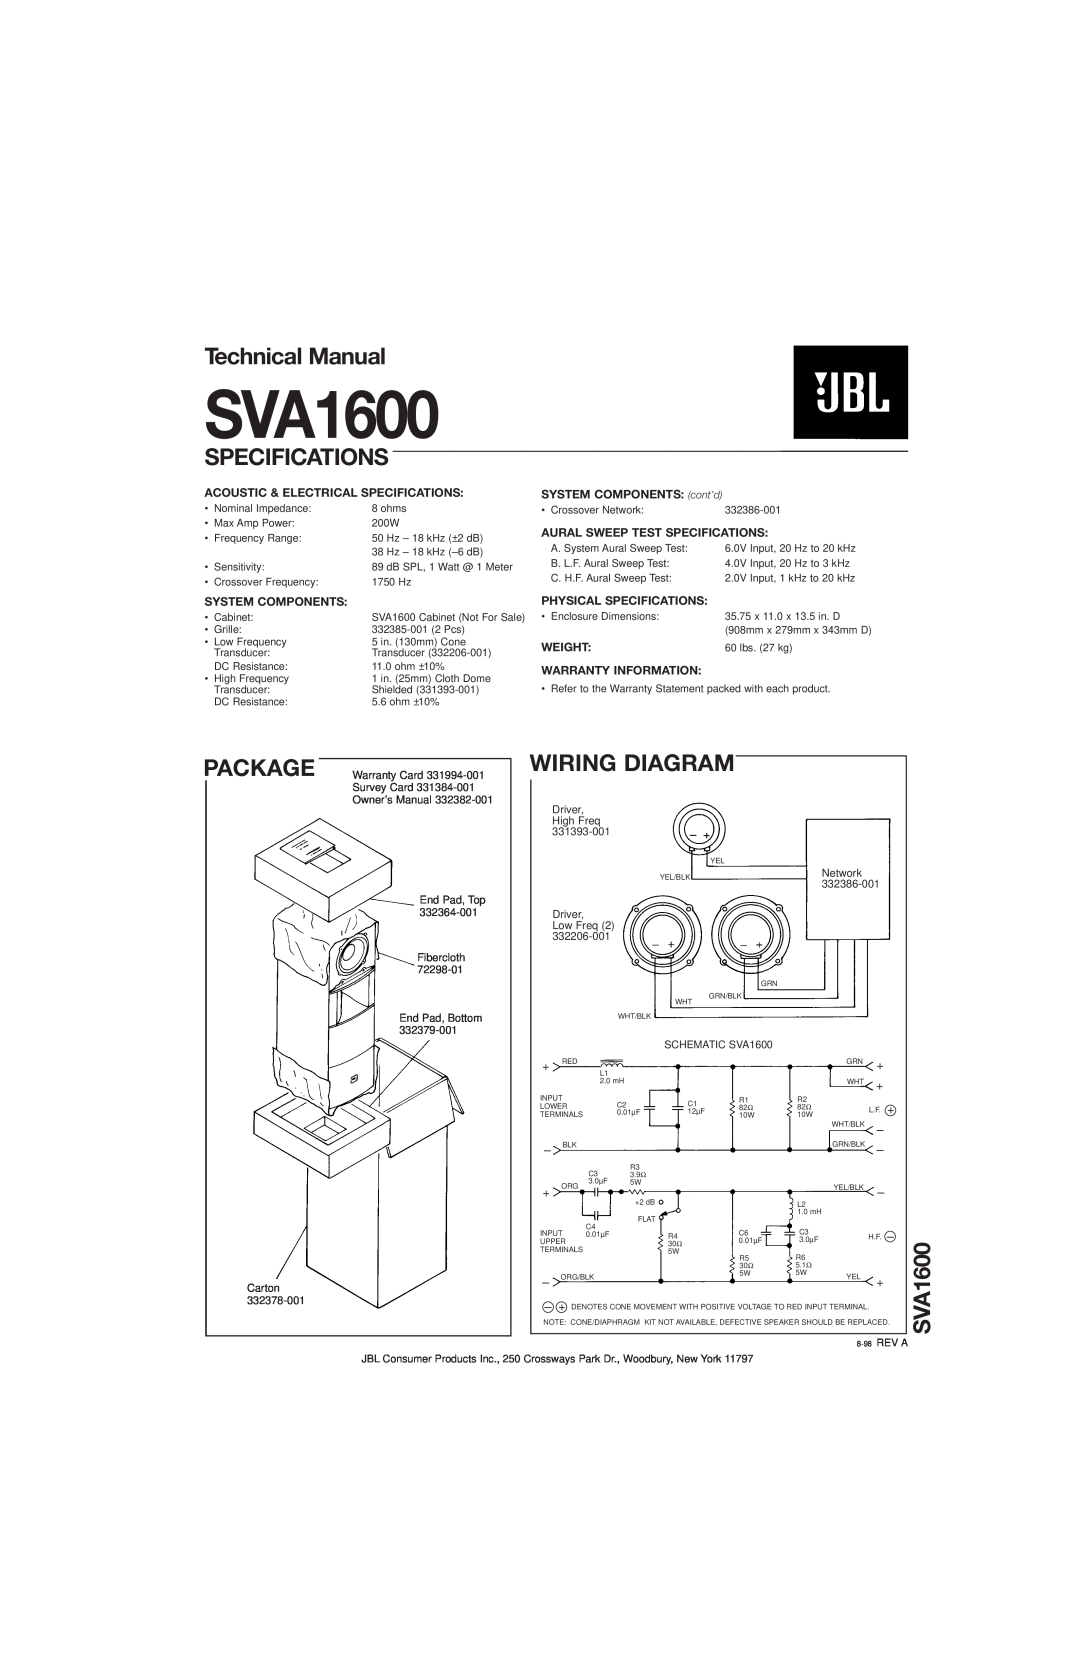 JBL SVA1600 technical manual Technical Manual, Specifications, Wiring Diagram, Package, SYSTEM COMPONENTS cont’d, Weight 